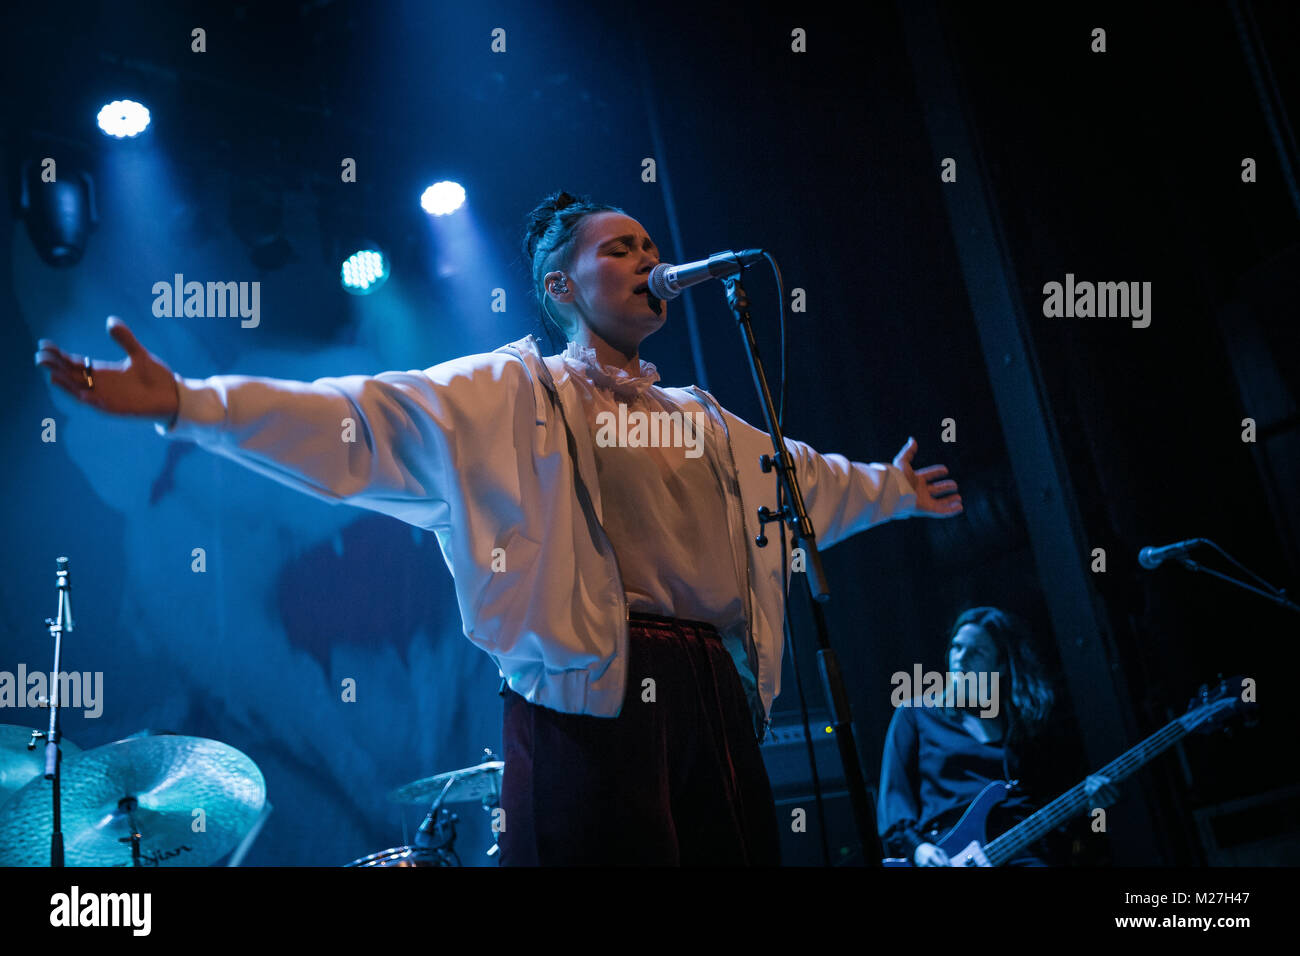 Indie Pop Singer High Resolution Stock Photography and Images - Alamy